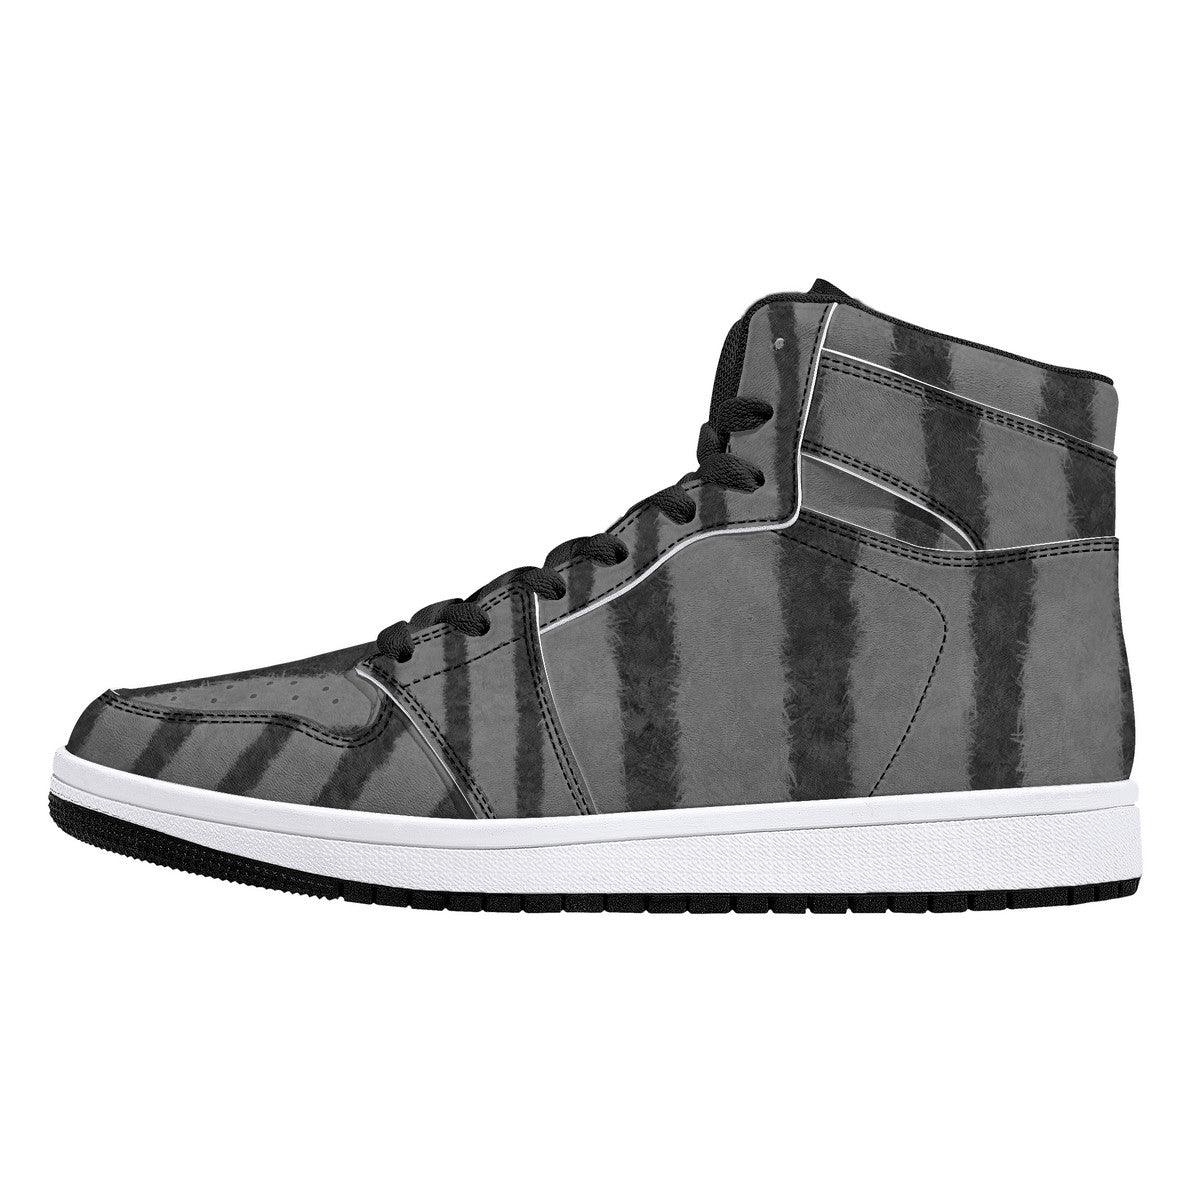 "Mono Plume" High-Top Synthetic Leather Sneakers